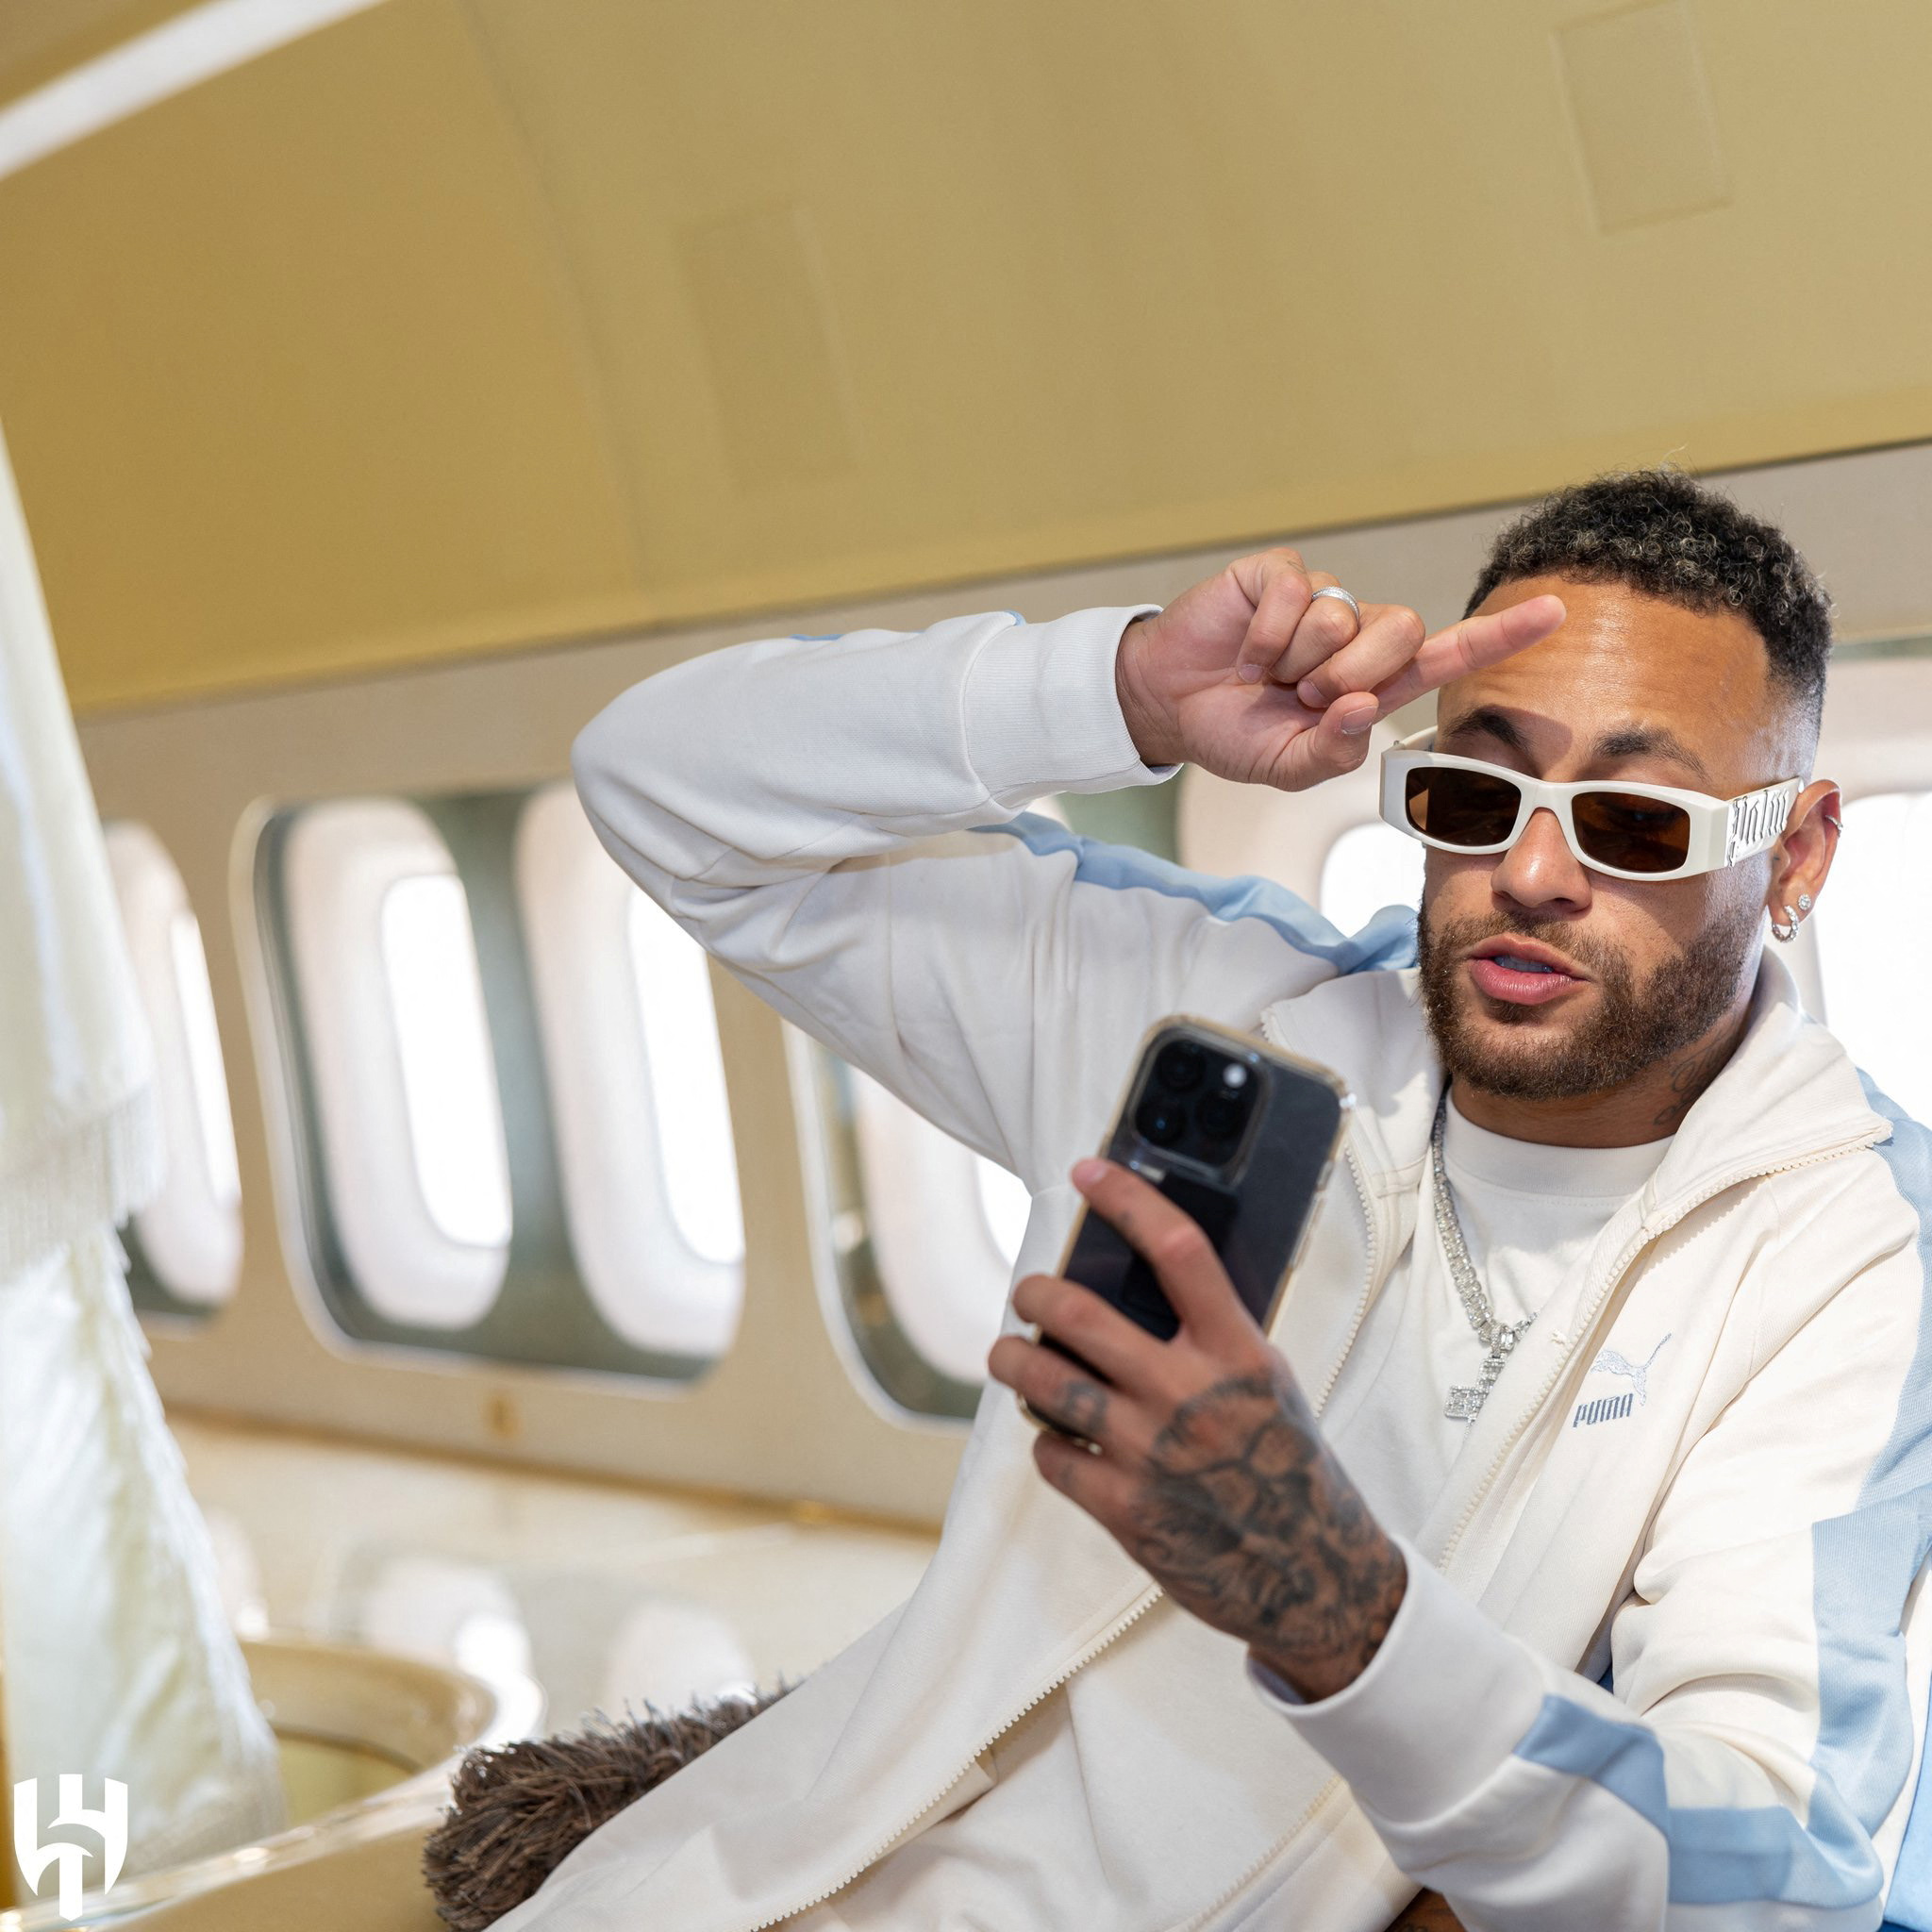 Neymar leaves Paris on his new private plane heading to his new team in Saudi Arabia